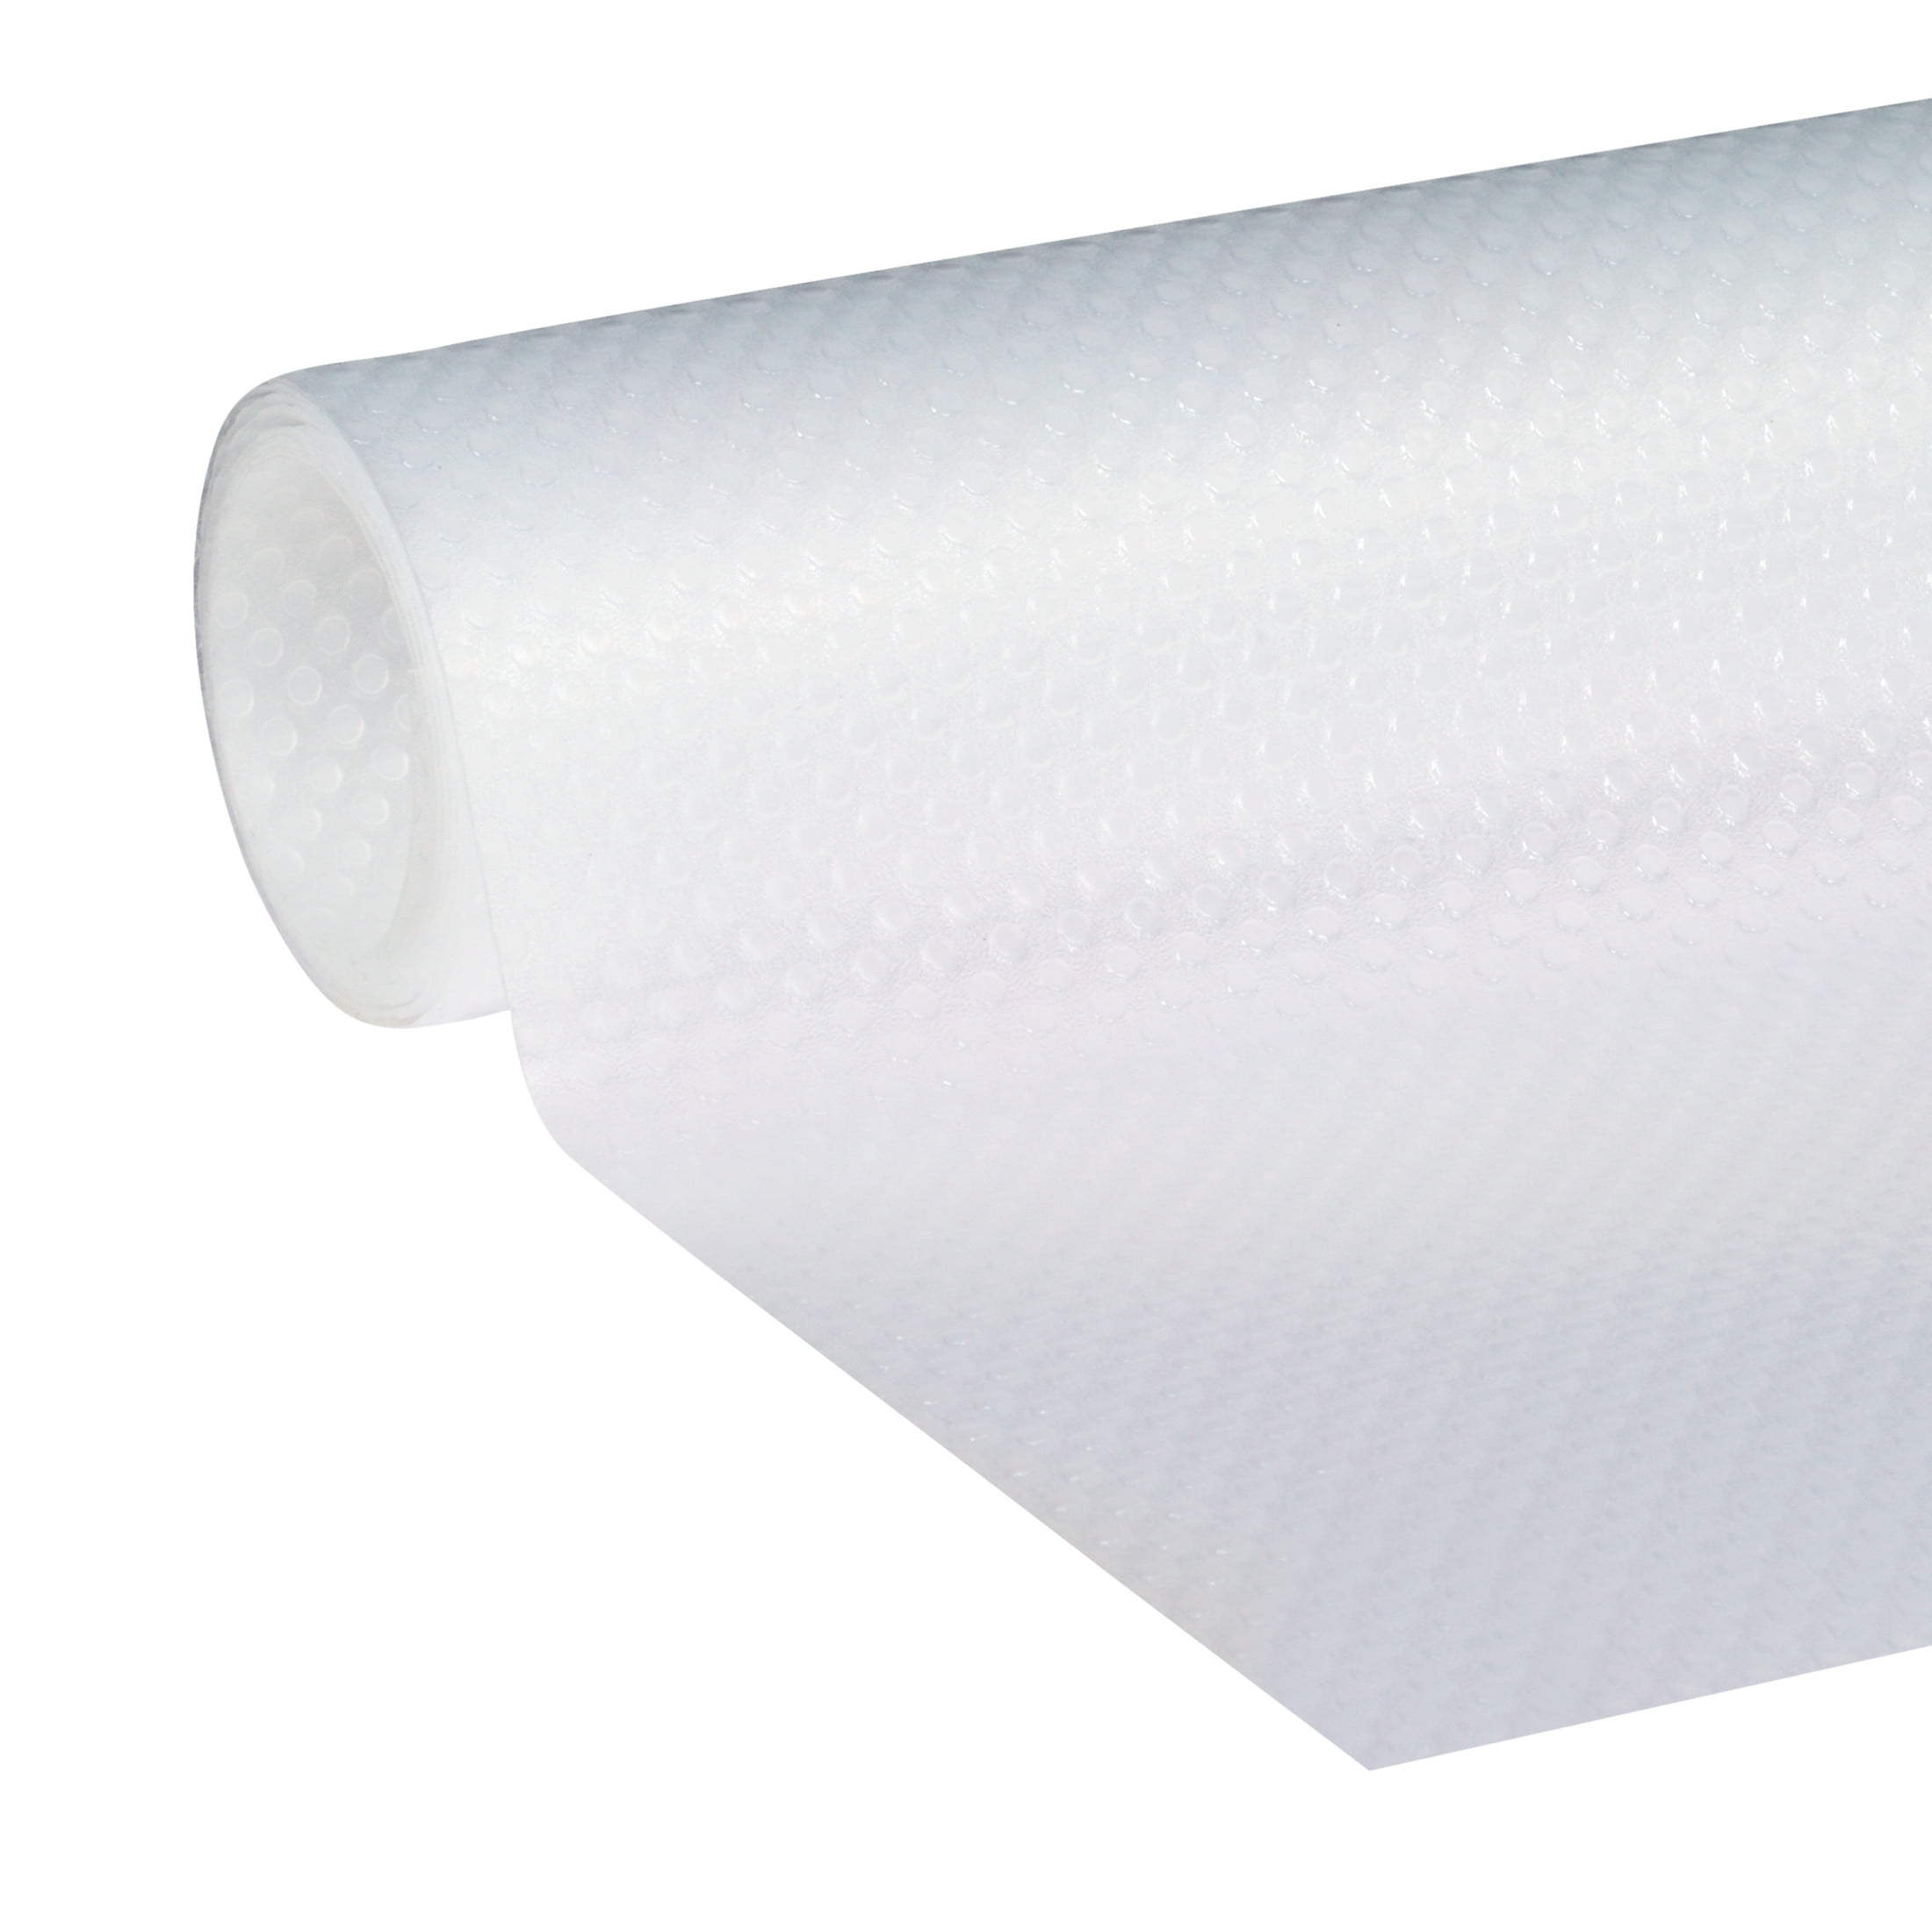 EasyLiner Clear Classic Shelf Liner, Clear, 20 in. x 12 ft. Roll